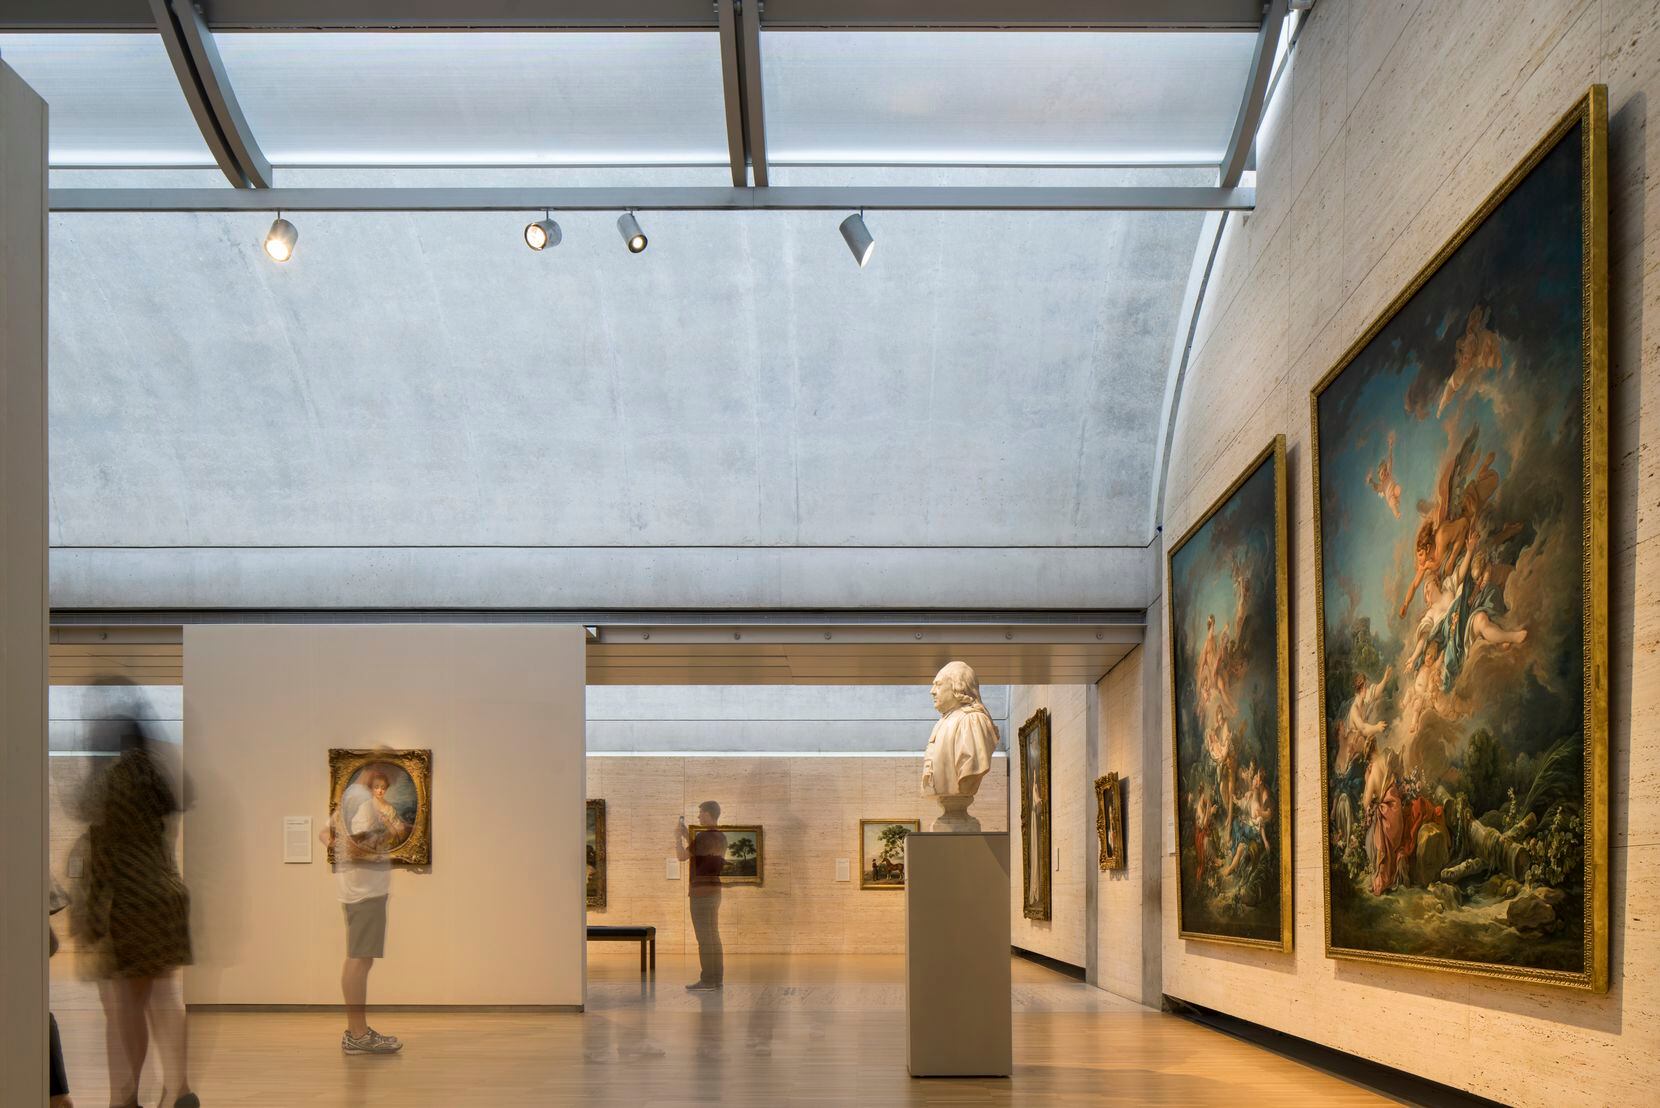 A shot of Fort Worth's Kimbell Art Museum with a timelapse shot of people moving throughout.